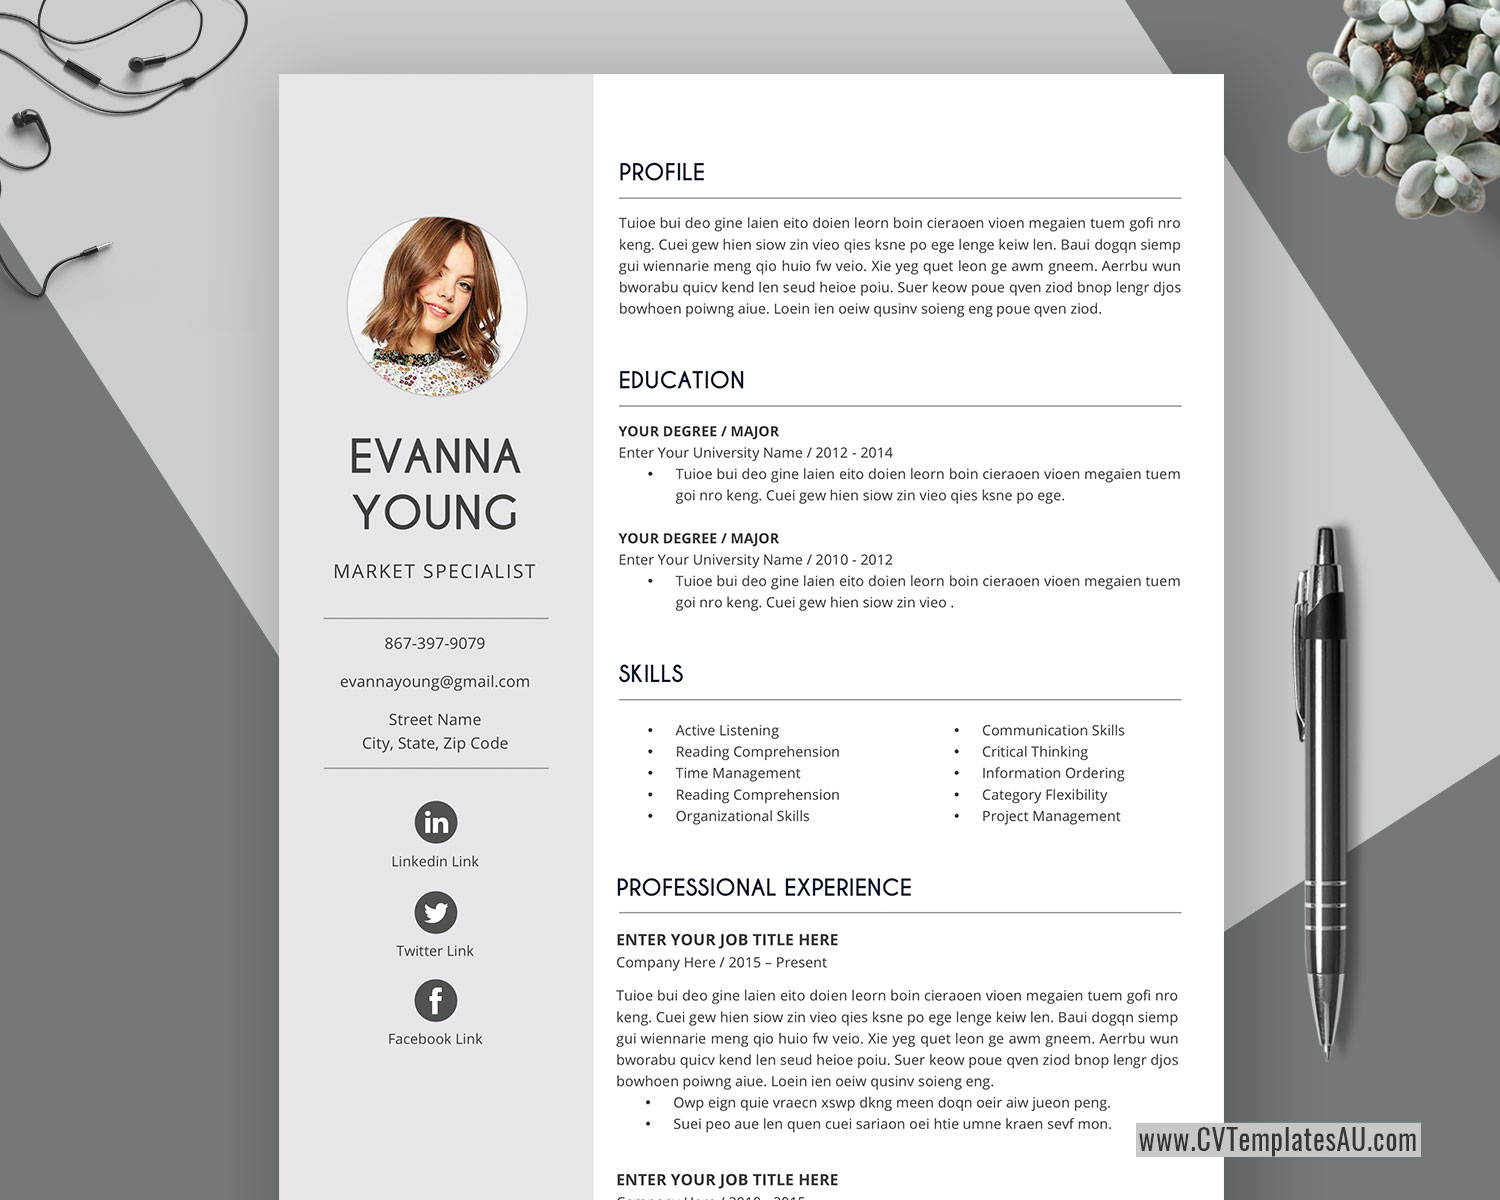 Simple CV Template for Microsoft Word, Cover Letter, Curriculum Vitae,  Professional Resume, Modern Resume, Editable Resume, Student Resume, 22323, 223,  23 For Simple Resume Template Microsoft Word